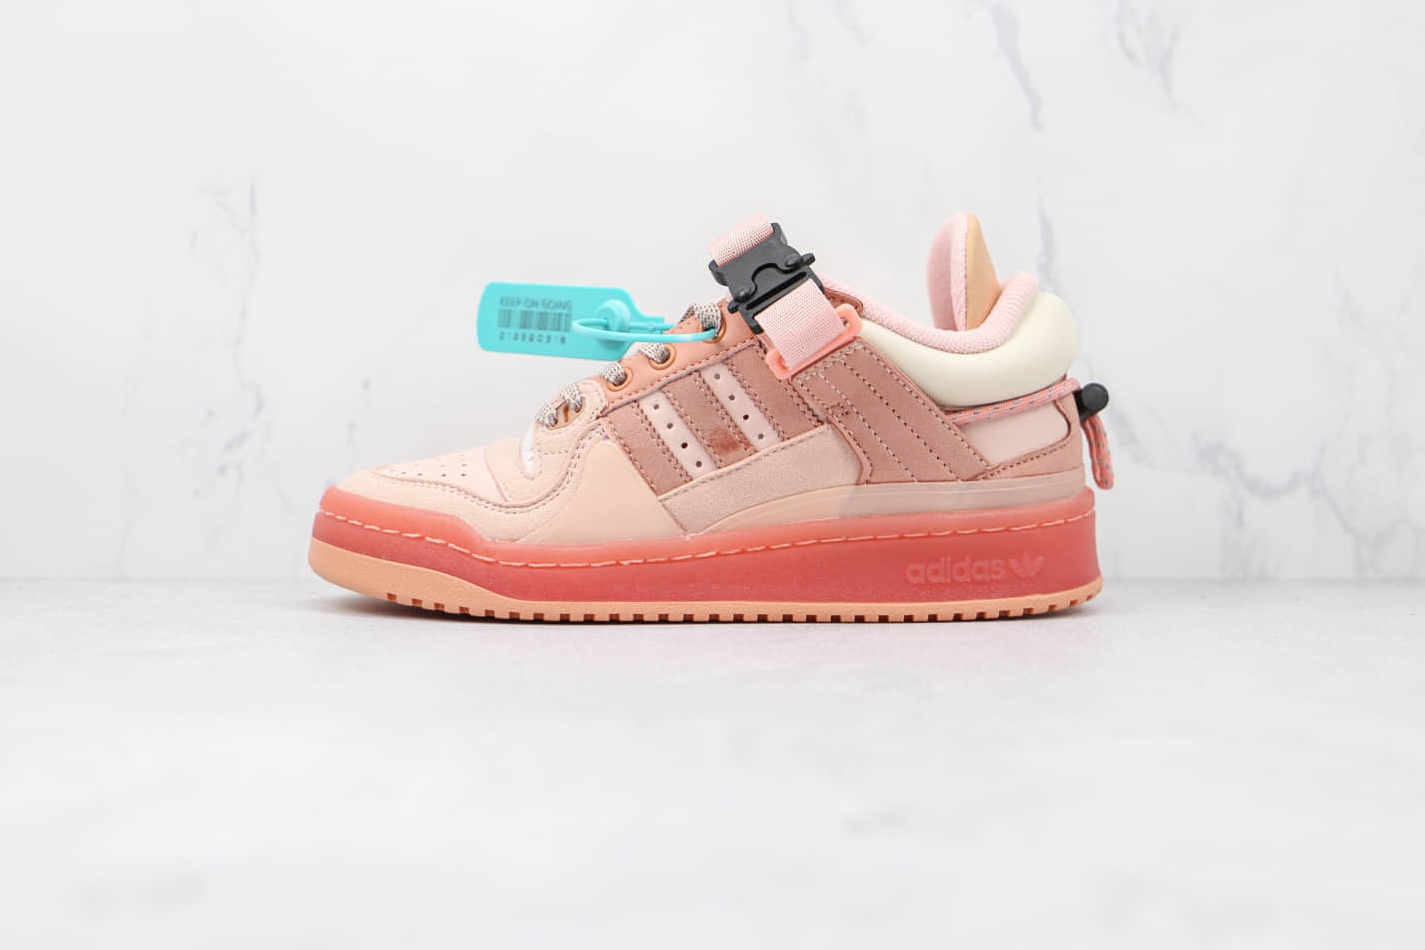 Adidas Bad Bunny x Forum Buckle Low 'Easter Egg' - Limited Edition Sneaker